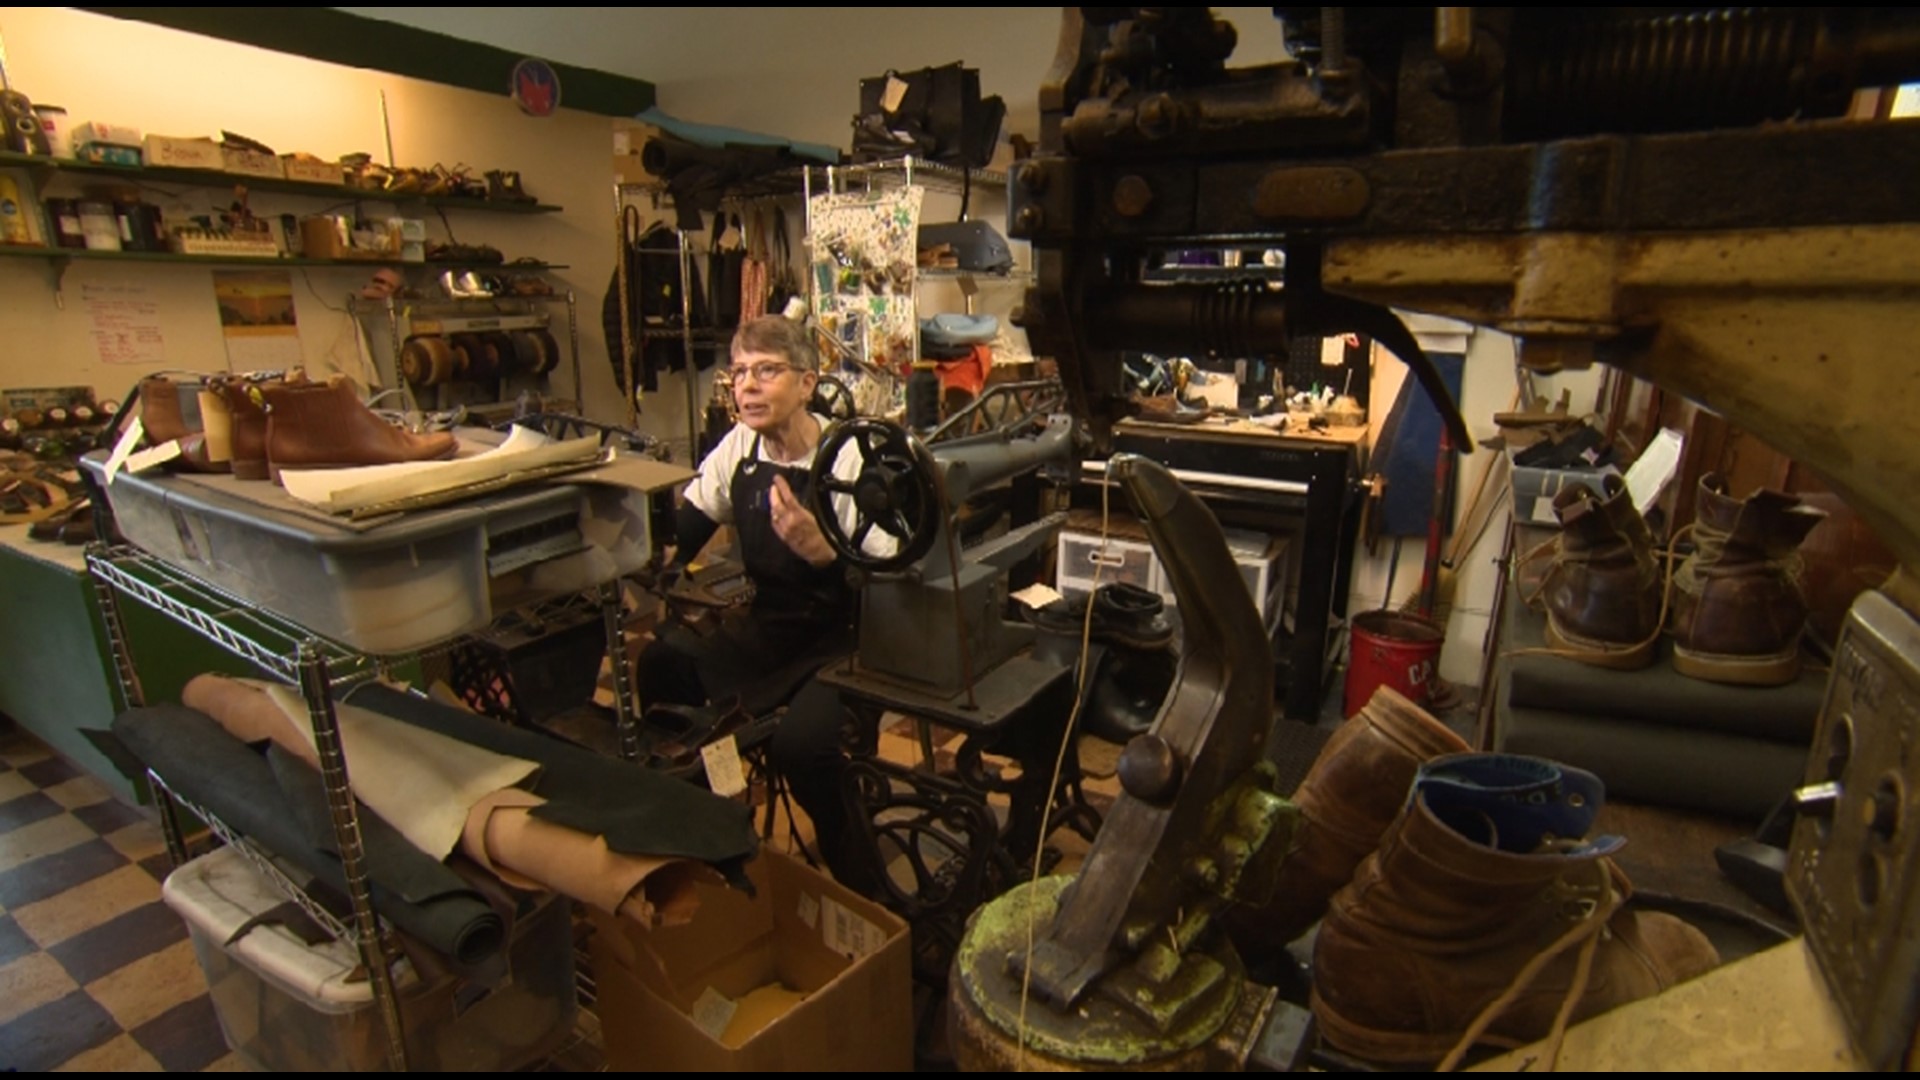 This Wallingford shop promotes sustainability and has been family run since 1928. #k5evening